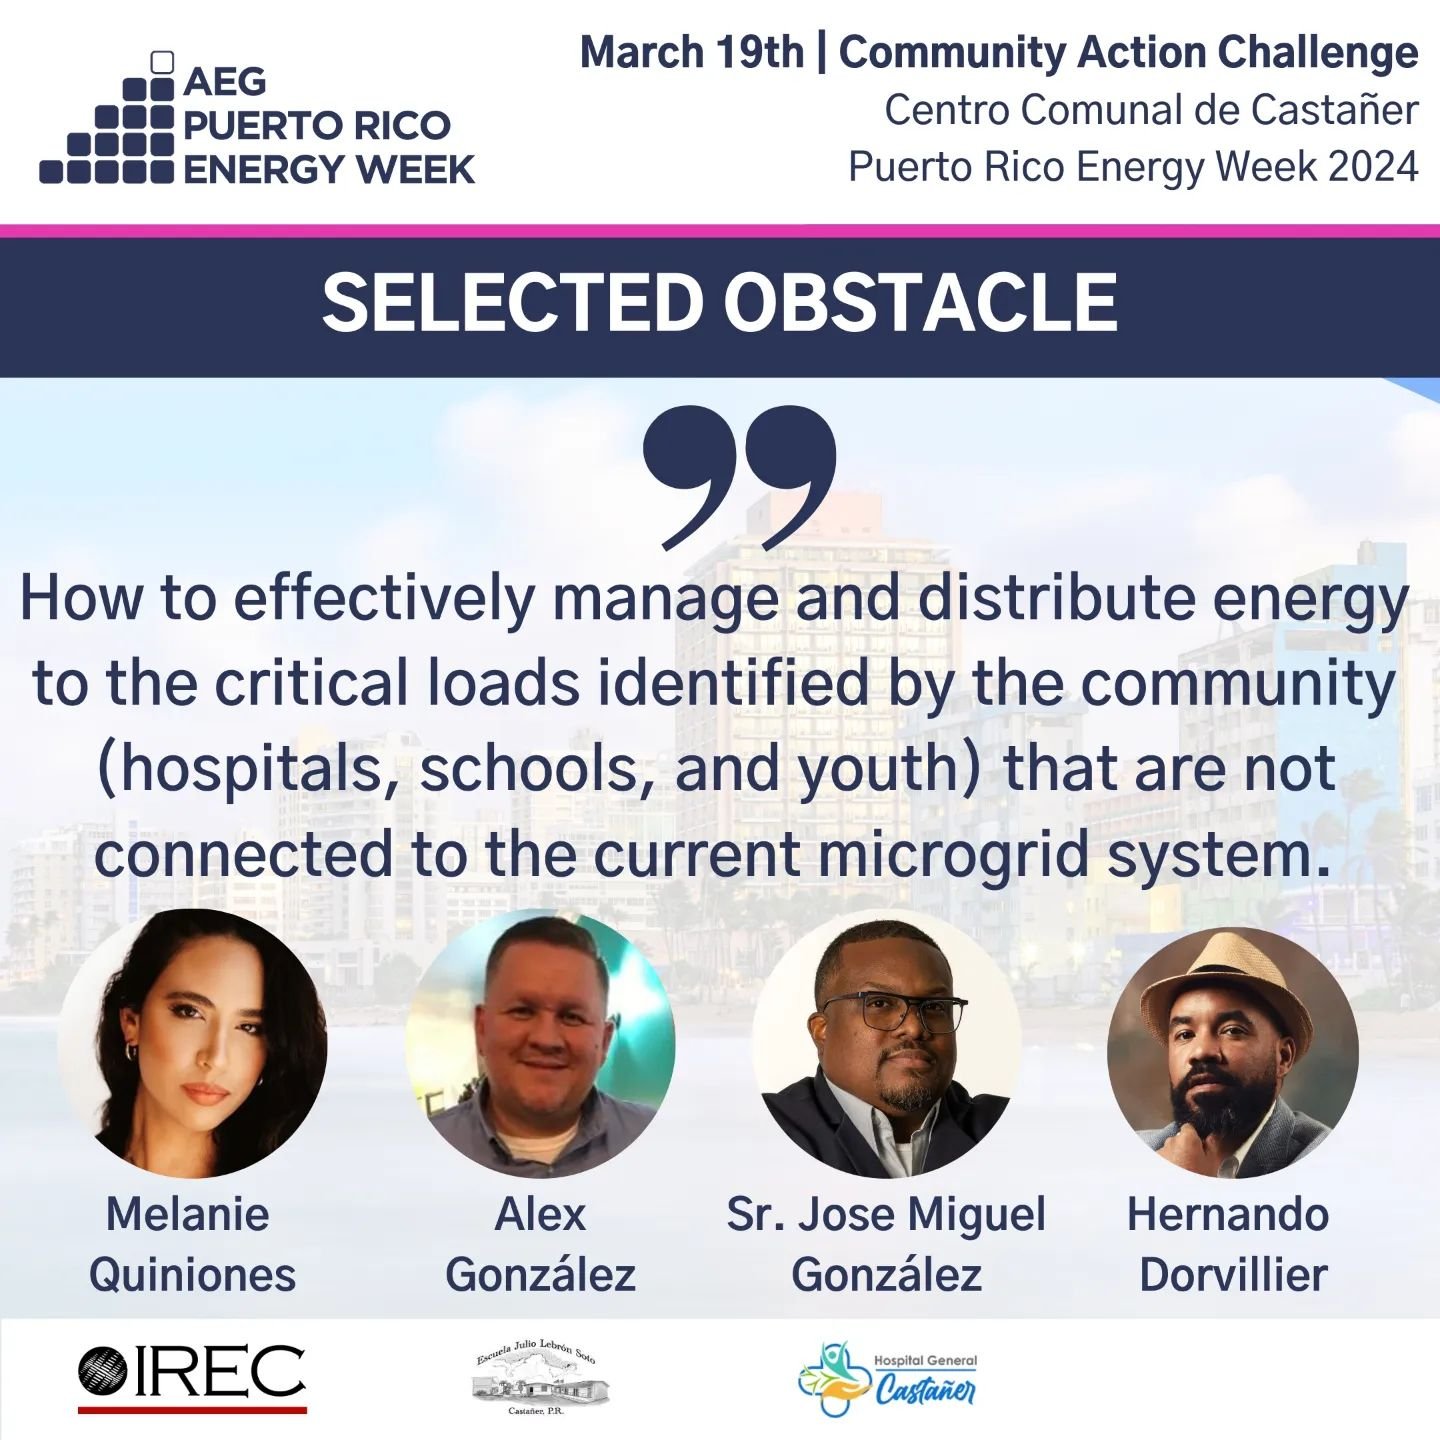 #PREnergyWeek24: Here are the results from the Community Action Challenge @ Casta&ntilde;er. View the Obstacle, 90-Day Sprint + Task Force Volunteers below! RSVP for PR Energy Week 25: https://lnkd.in/eMEsPcg9

Thank you to our hosts, C. P. Smith, Ma